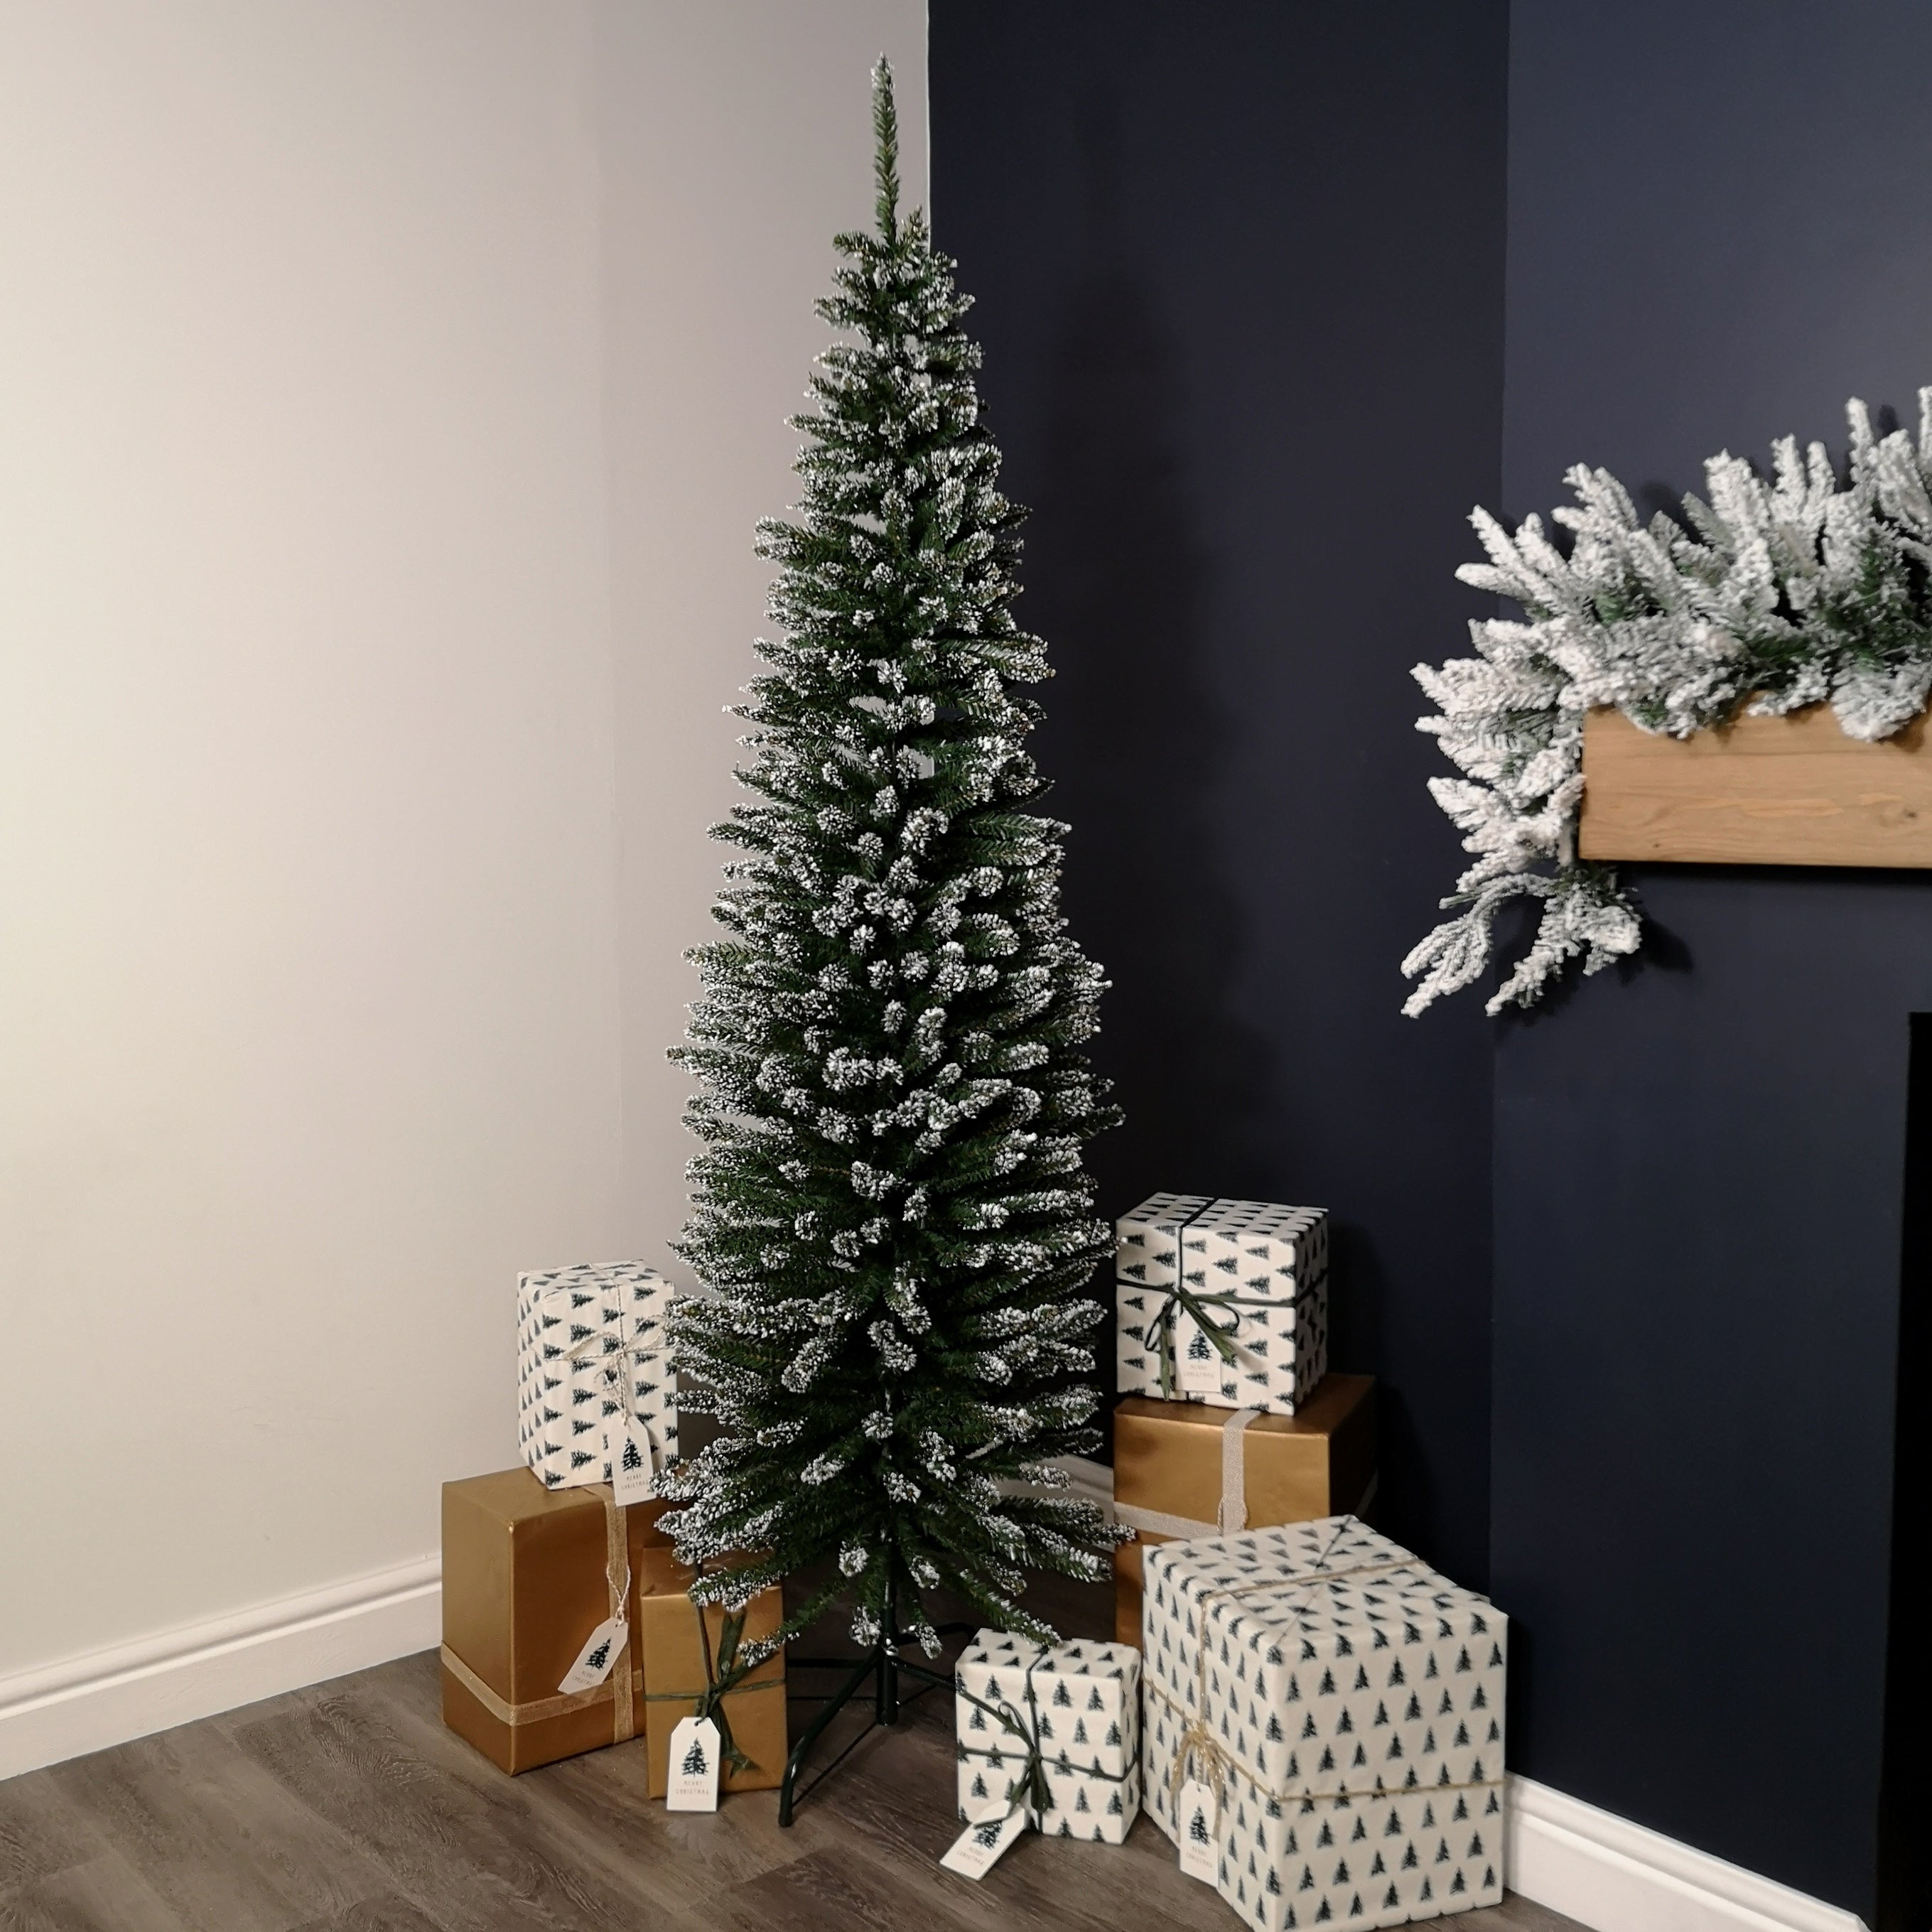 6.5ft (2m) Pencil Style Slim Snow Tipped Artificial Christmas Tree in Green